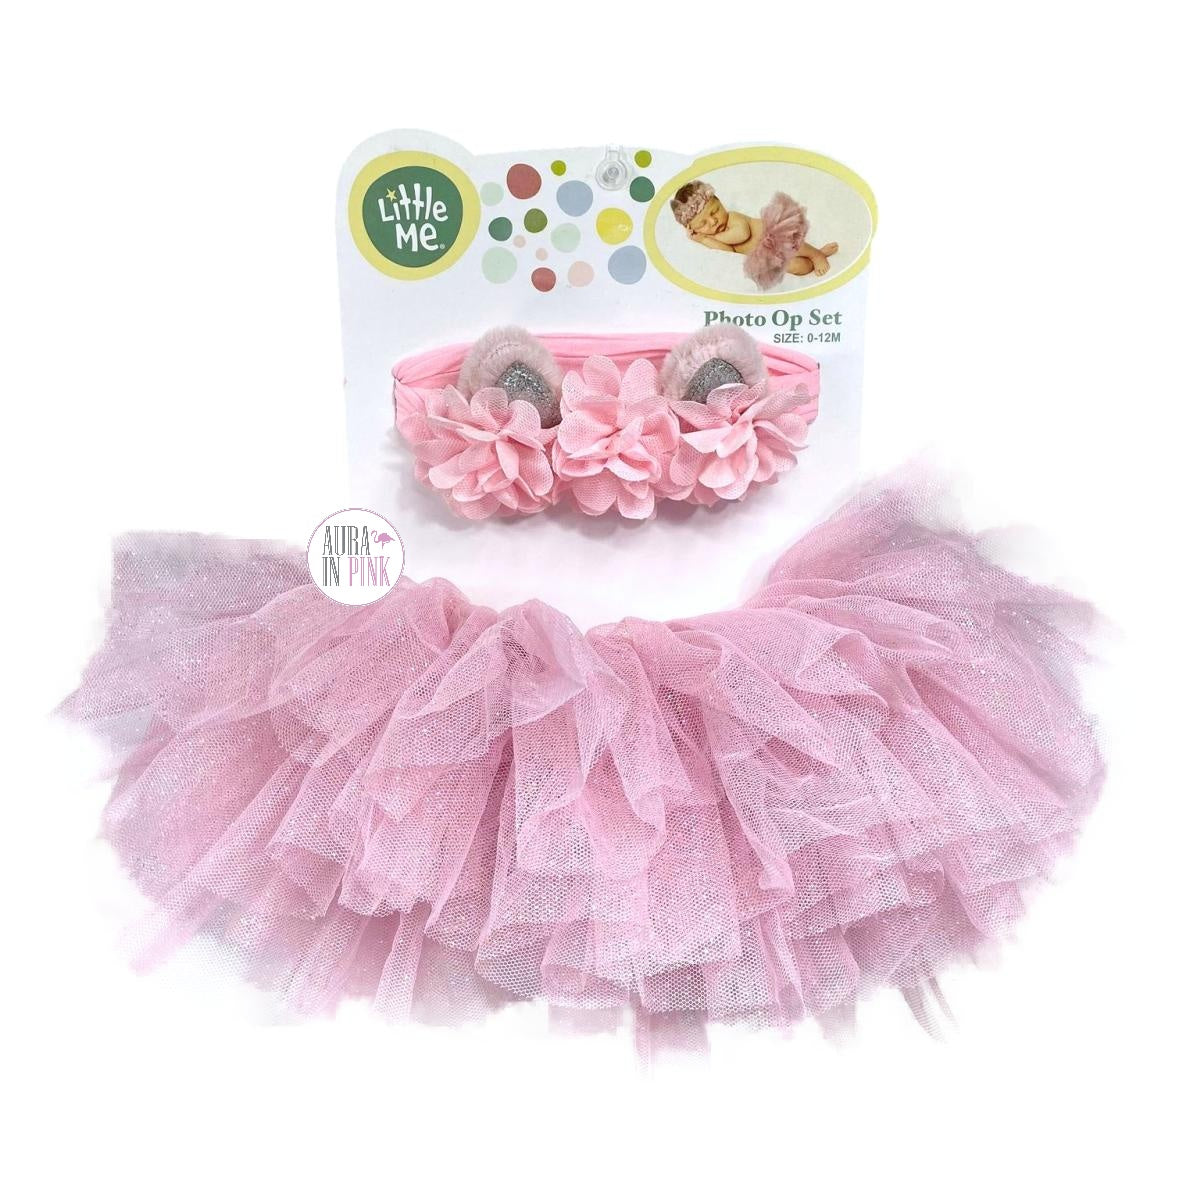 Little Me Pink Sparkly Tutu & Floral Eared Headpiece Baby Photo Op Set –  Aura In Pink Inc.